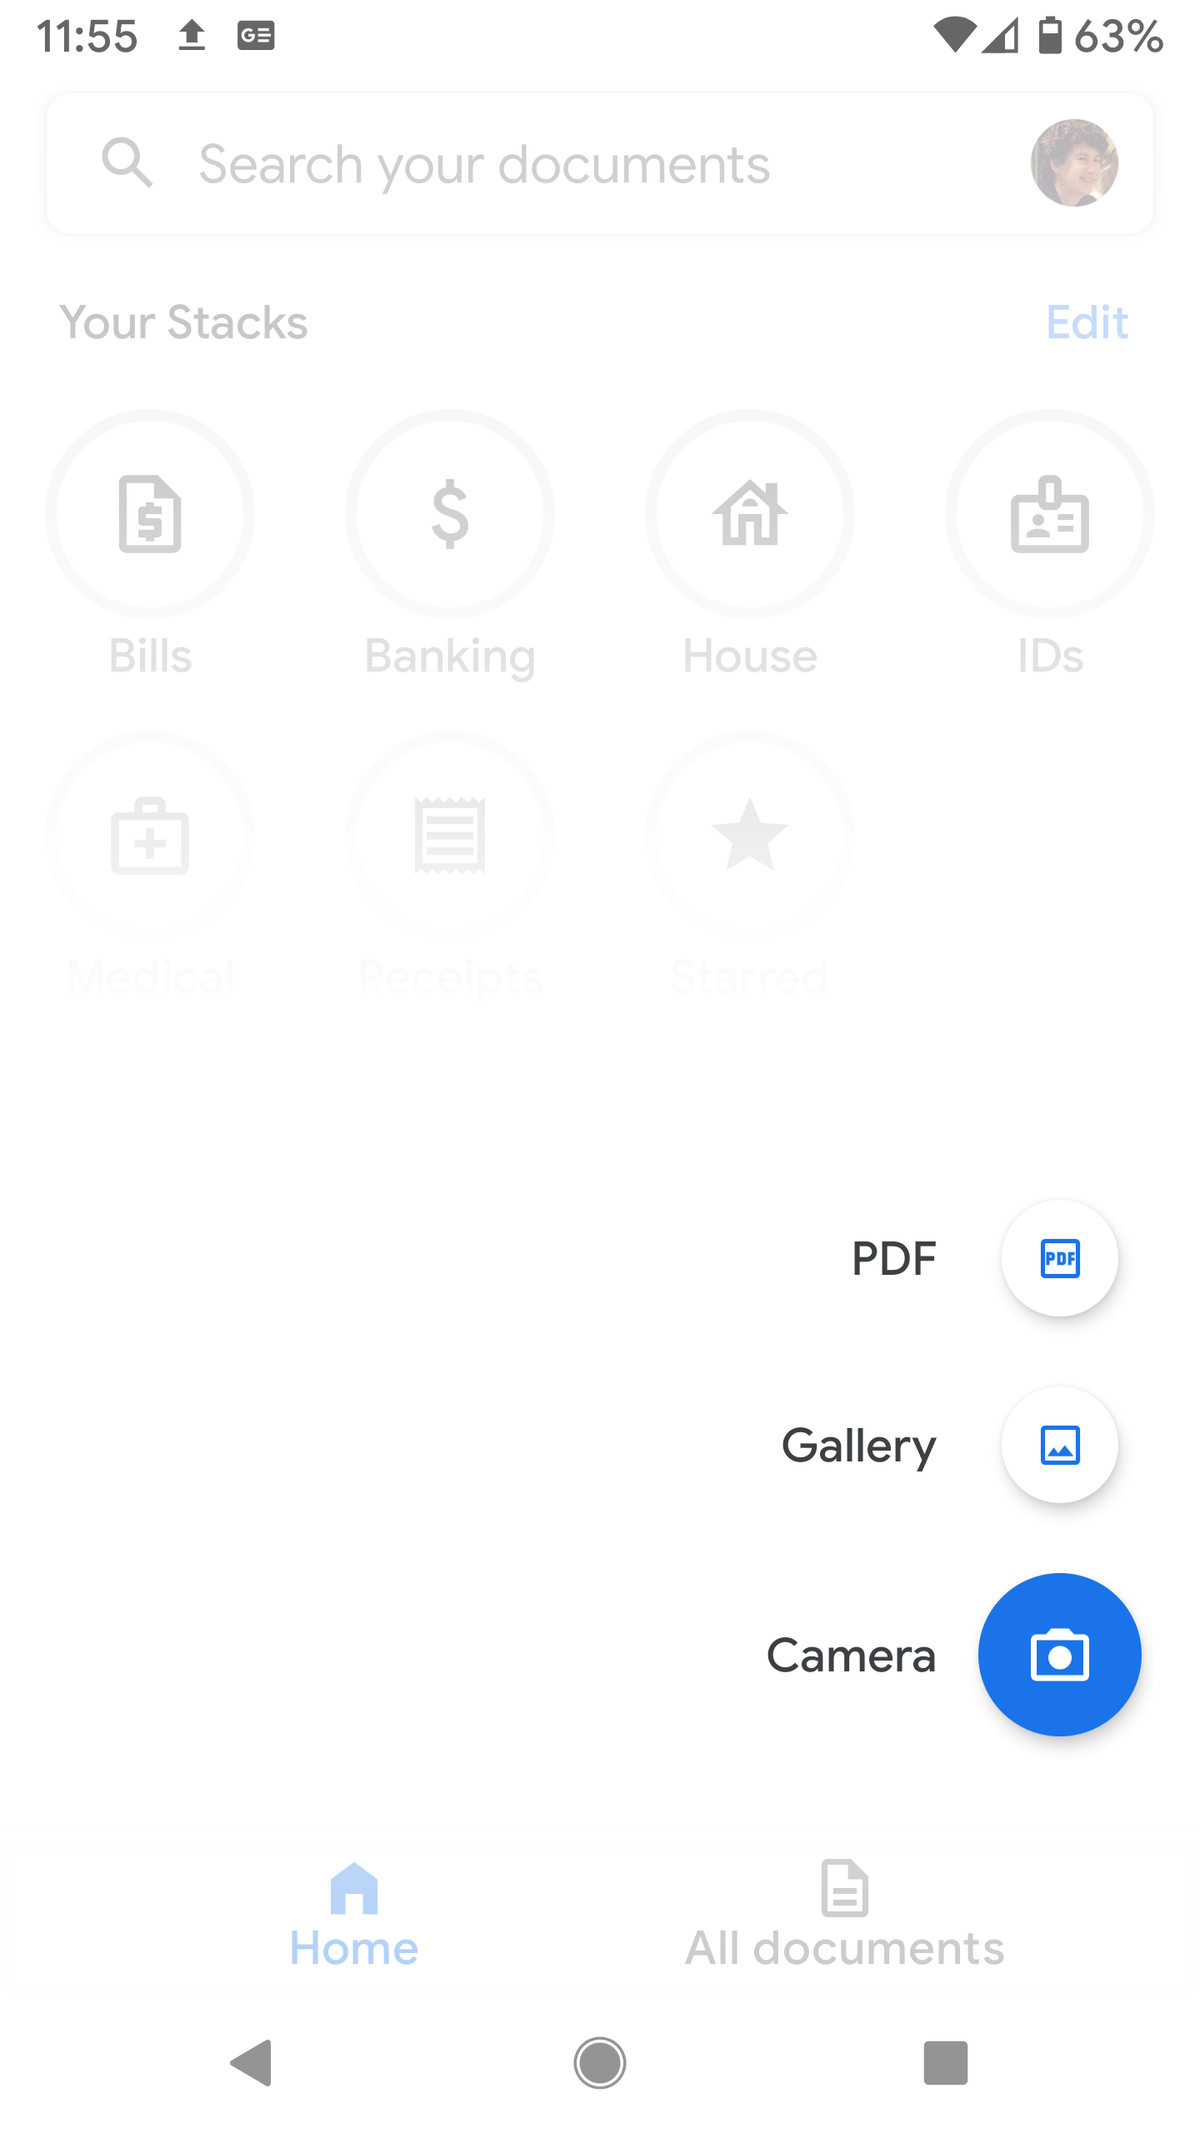 You can add an existing PDF or scan one using your phone’s camera.